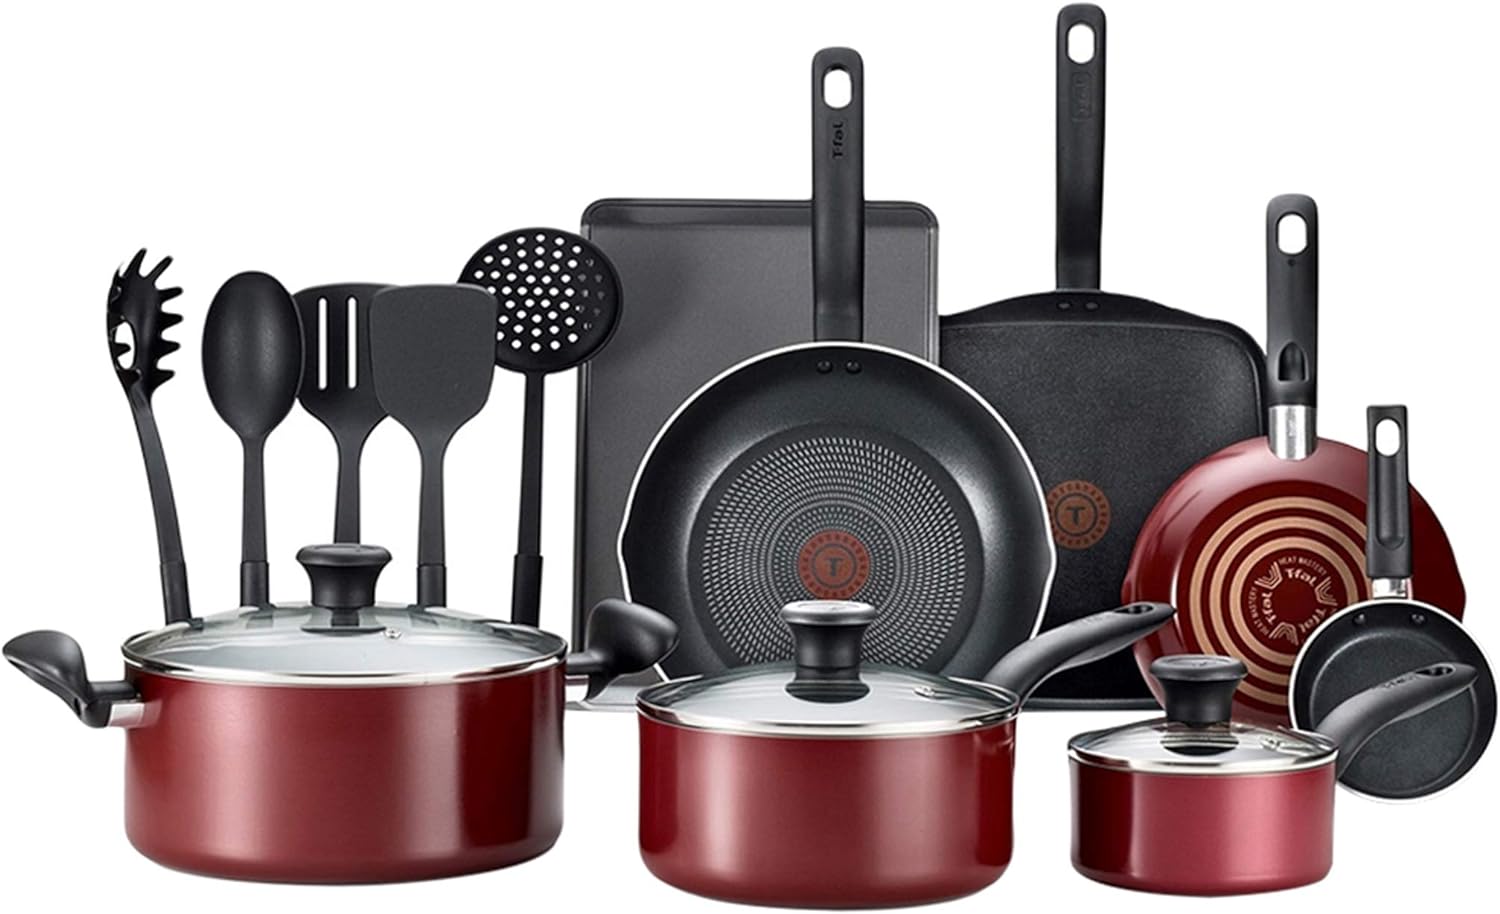 T-Fal Culinaire Cookware Set Review